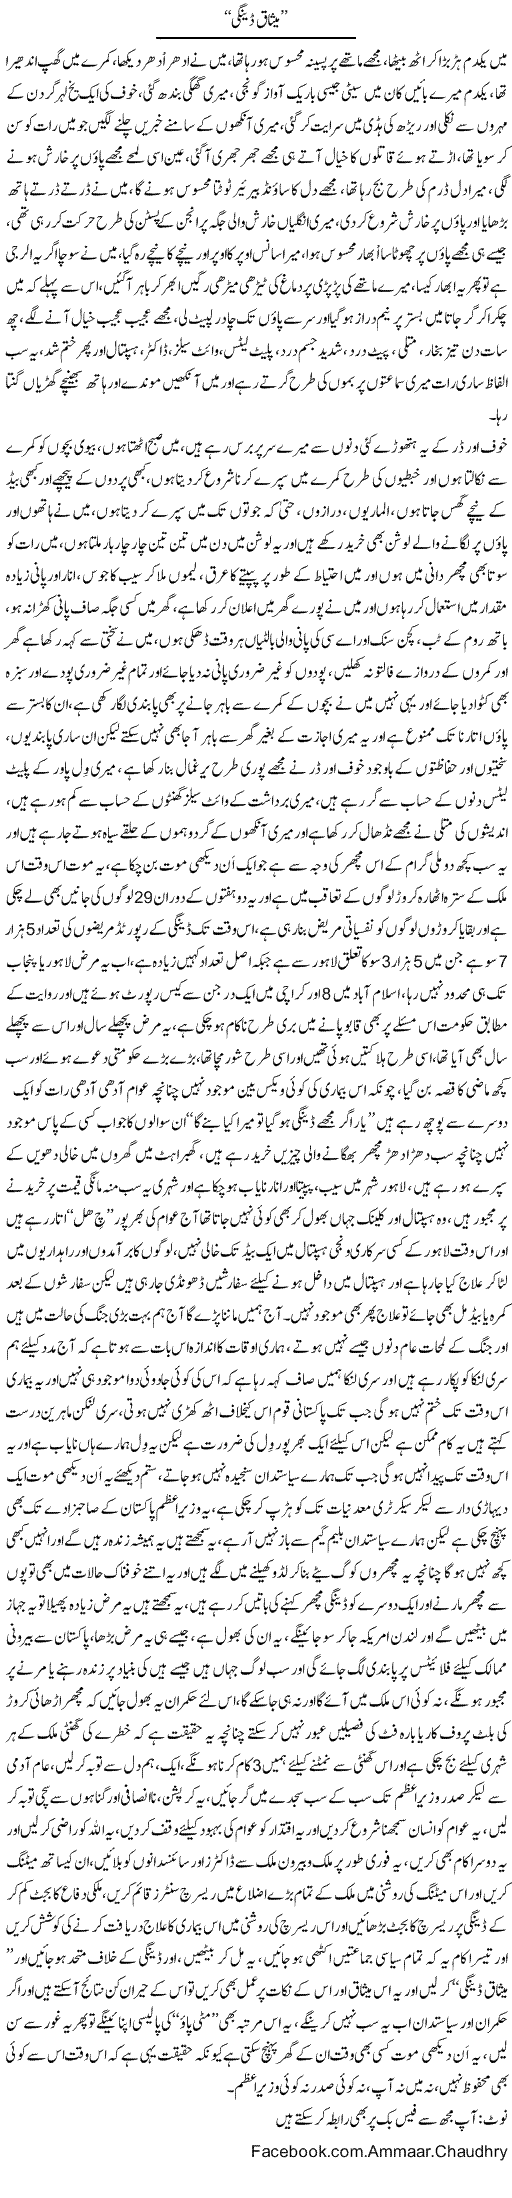 Dengue and Fear Express Column Amad Chaudhry 18 September 2011